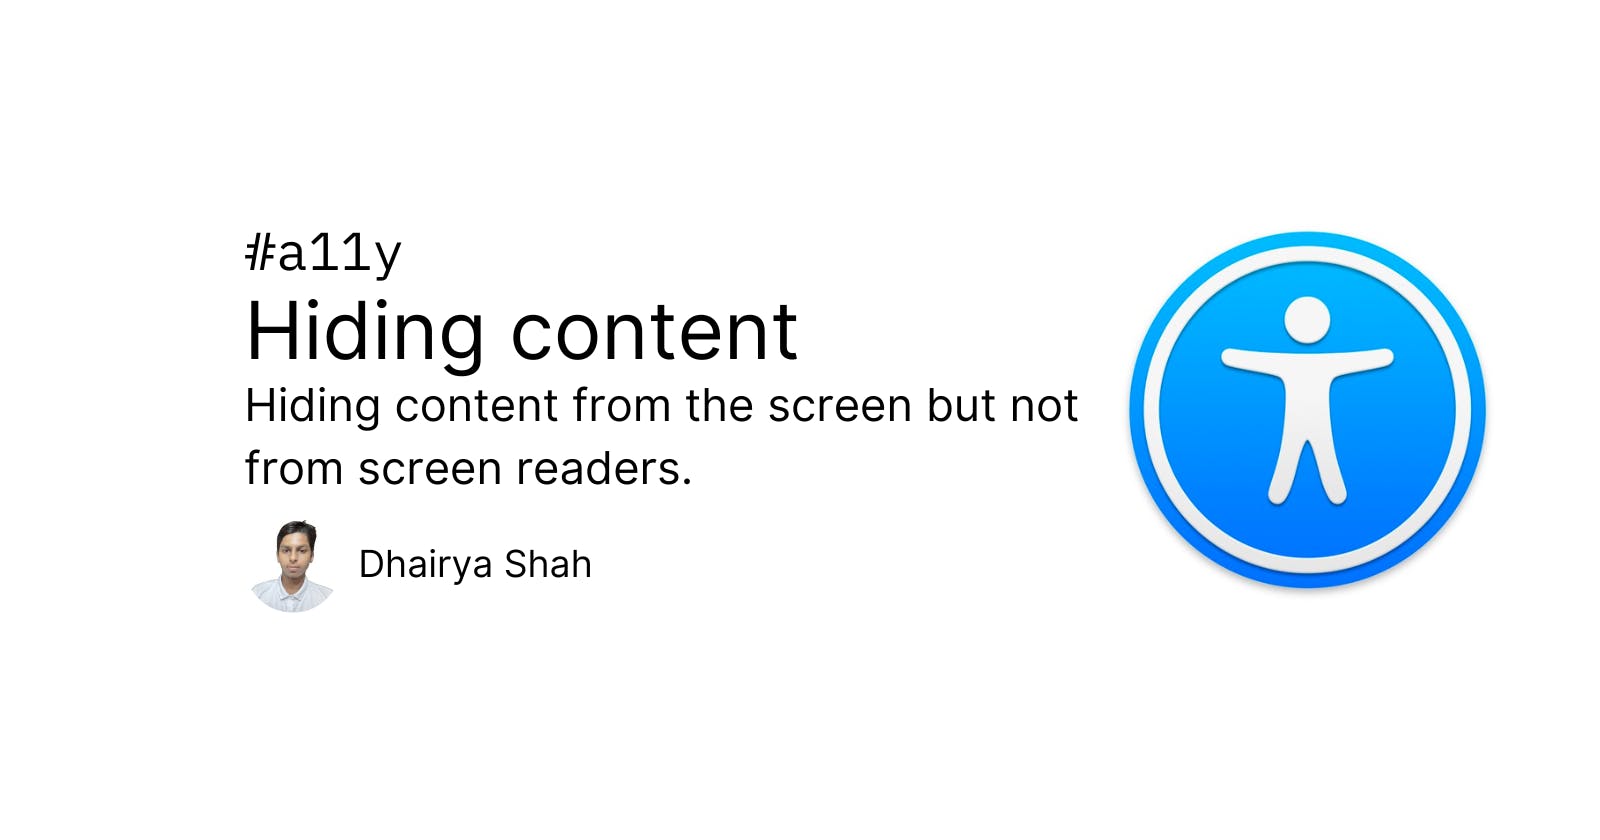 How to hide content from the screen and not from screen readers